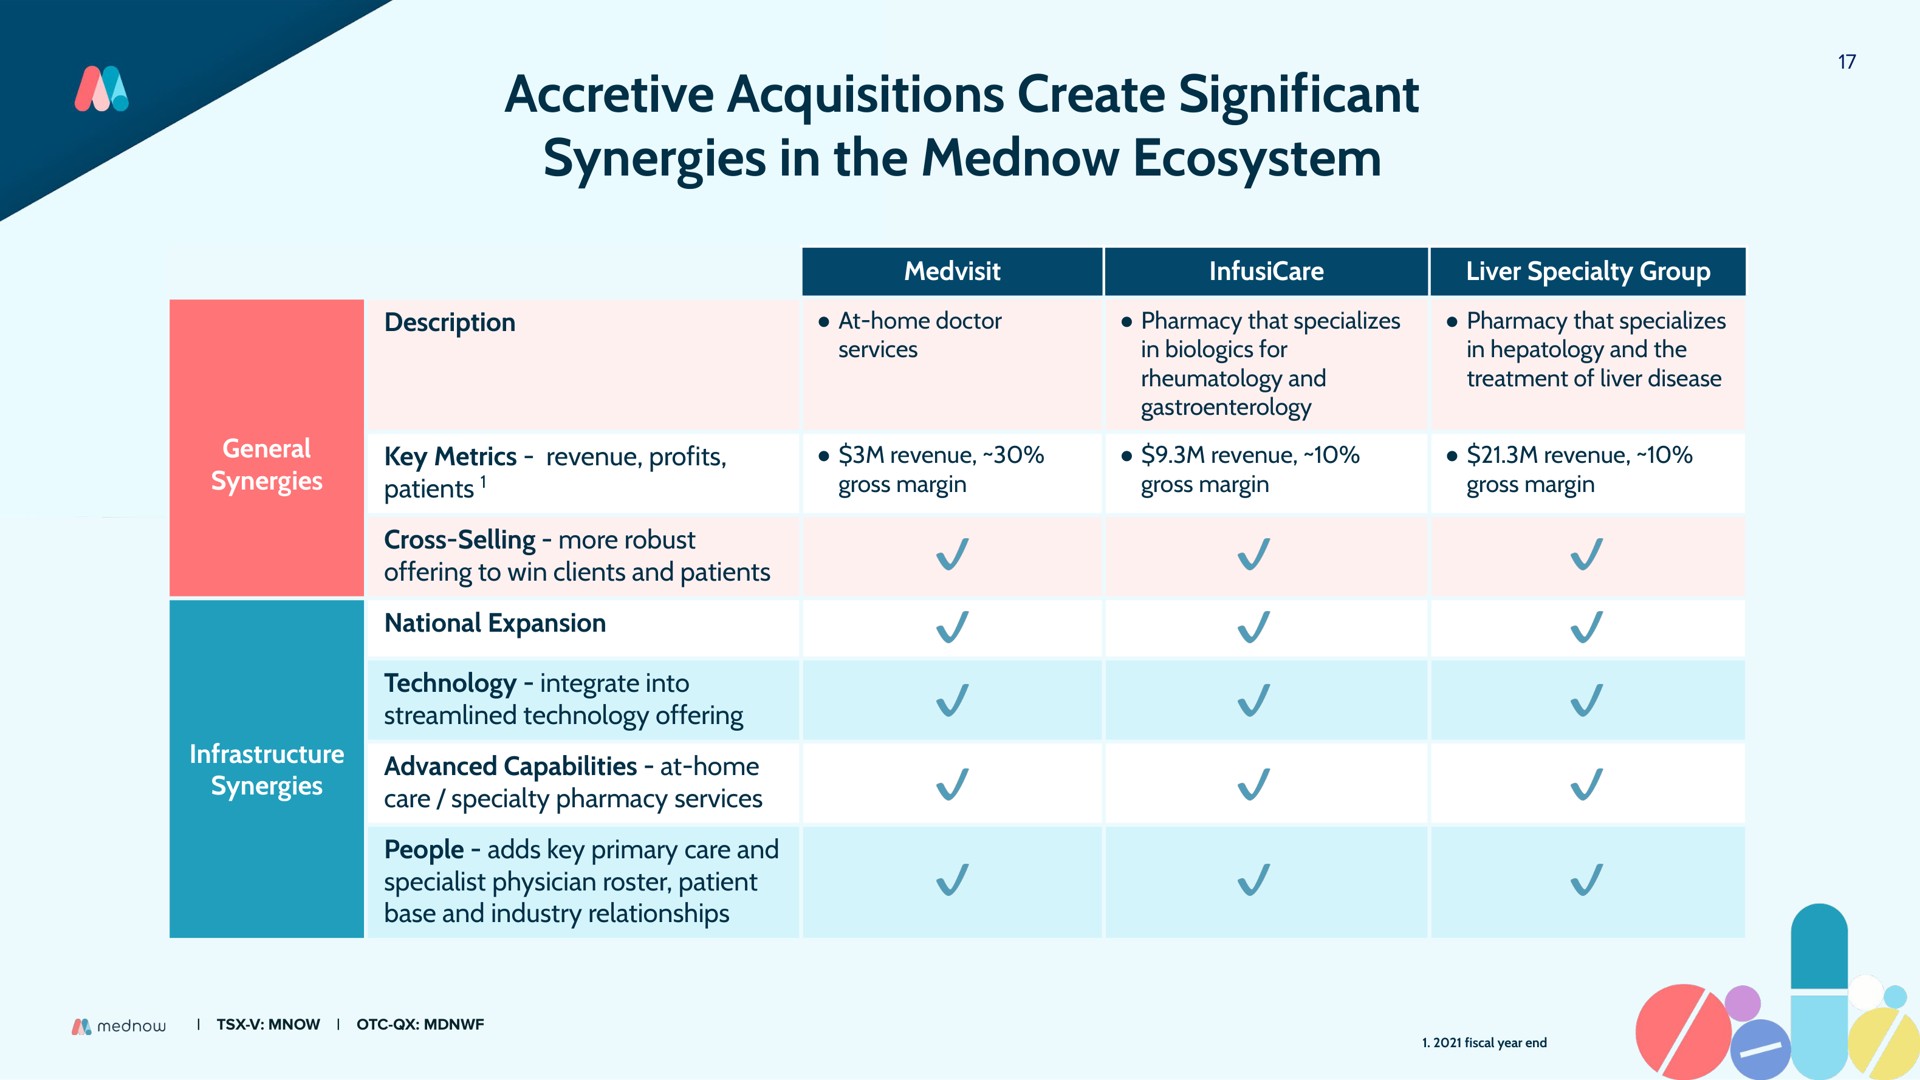 accretive acquisitions create significant synergies in the ecosystem | Mednow